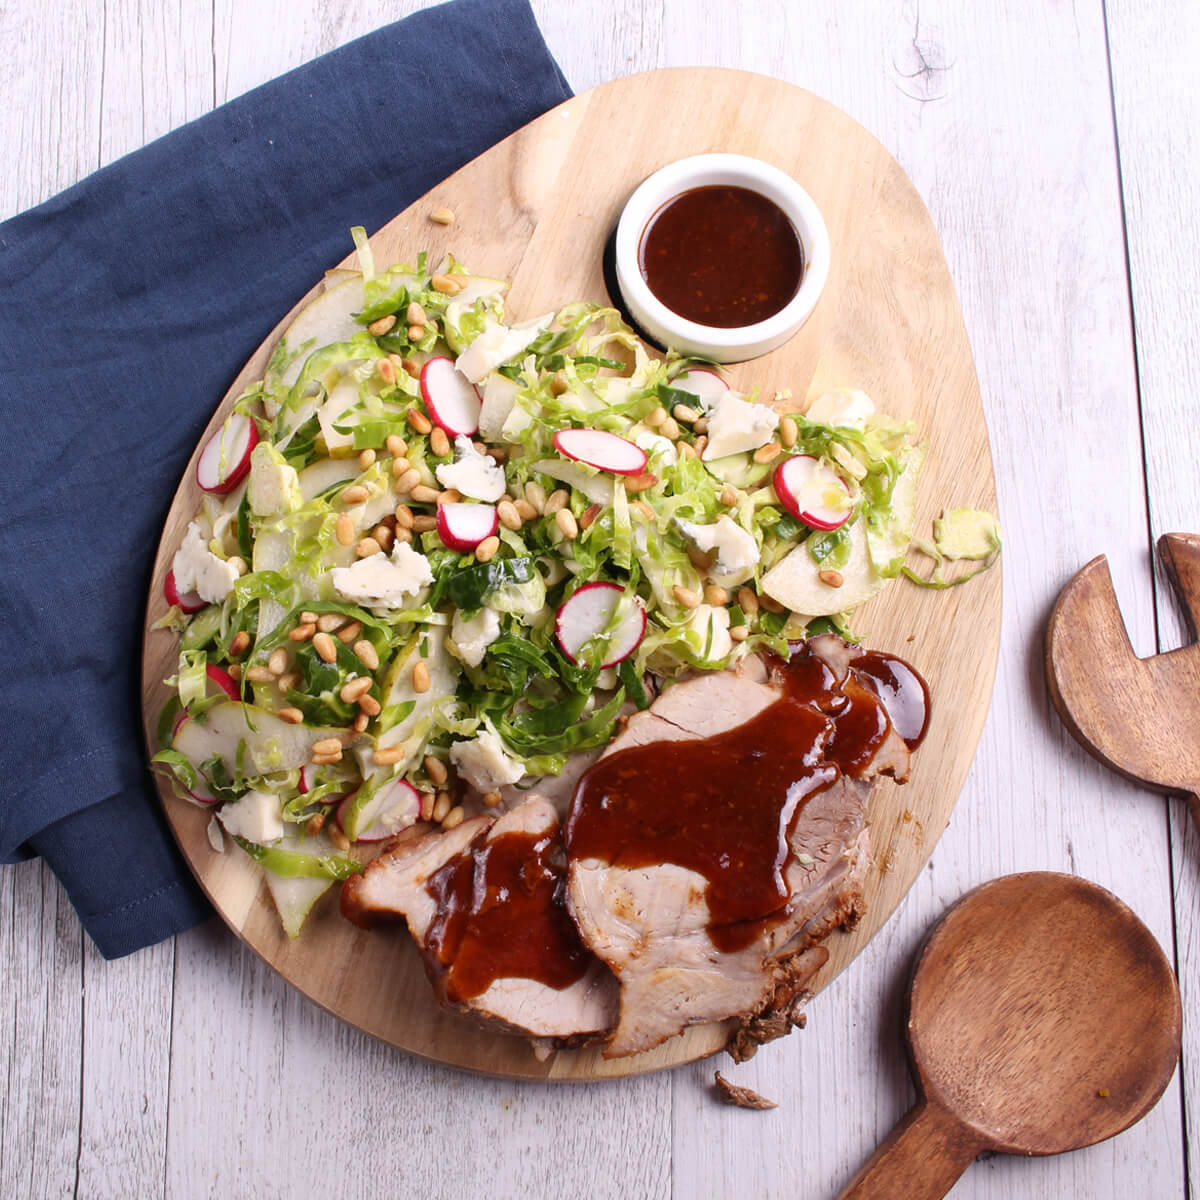 Roast with brussels sprout salad- - Forequarter roast